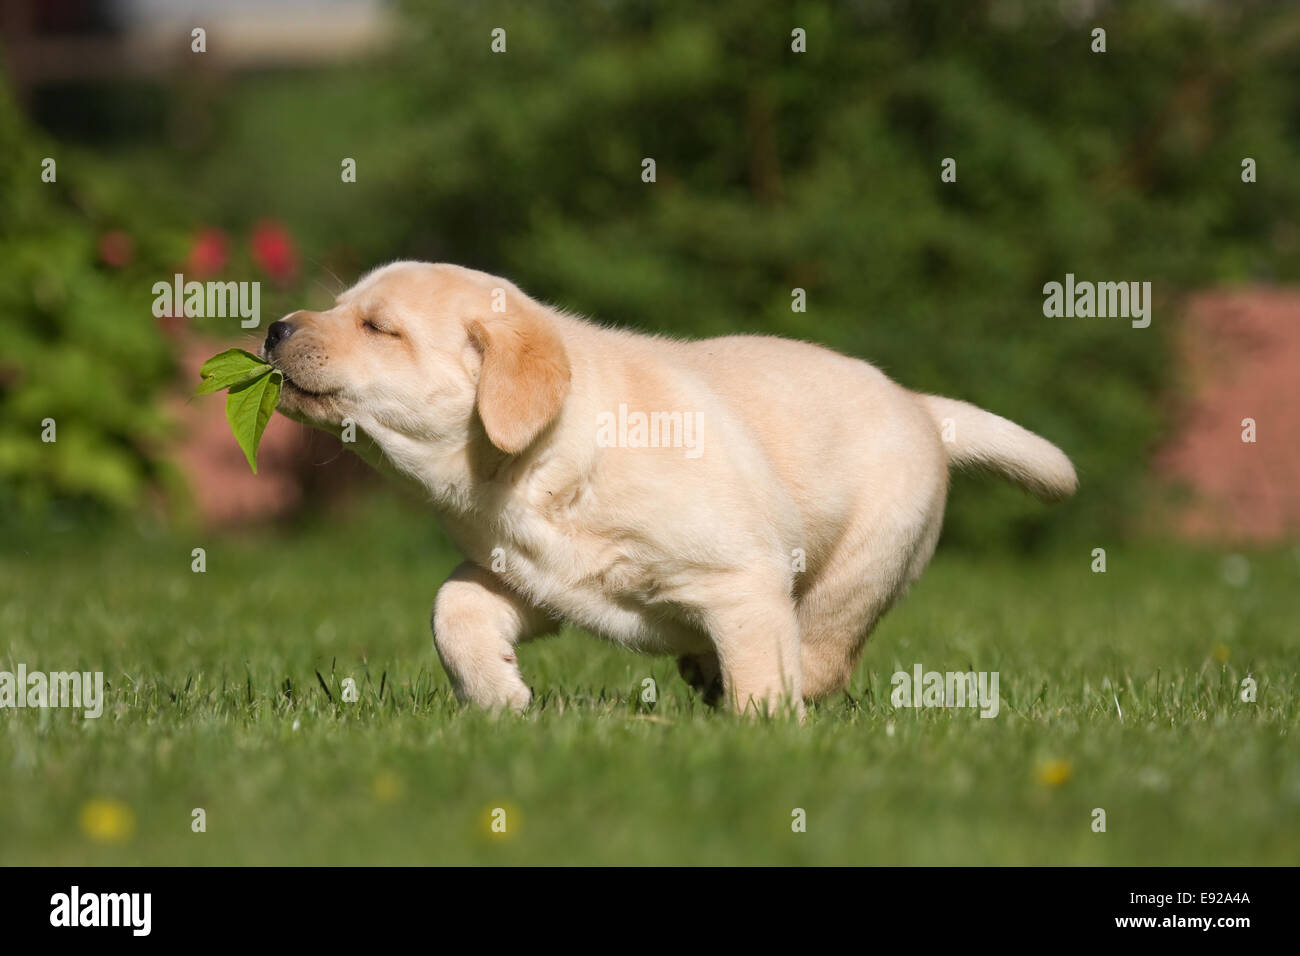 funny scene with a Labrador puppy Stock Photo - Alamy